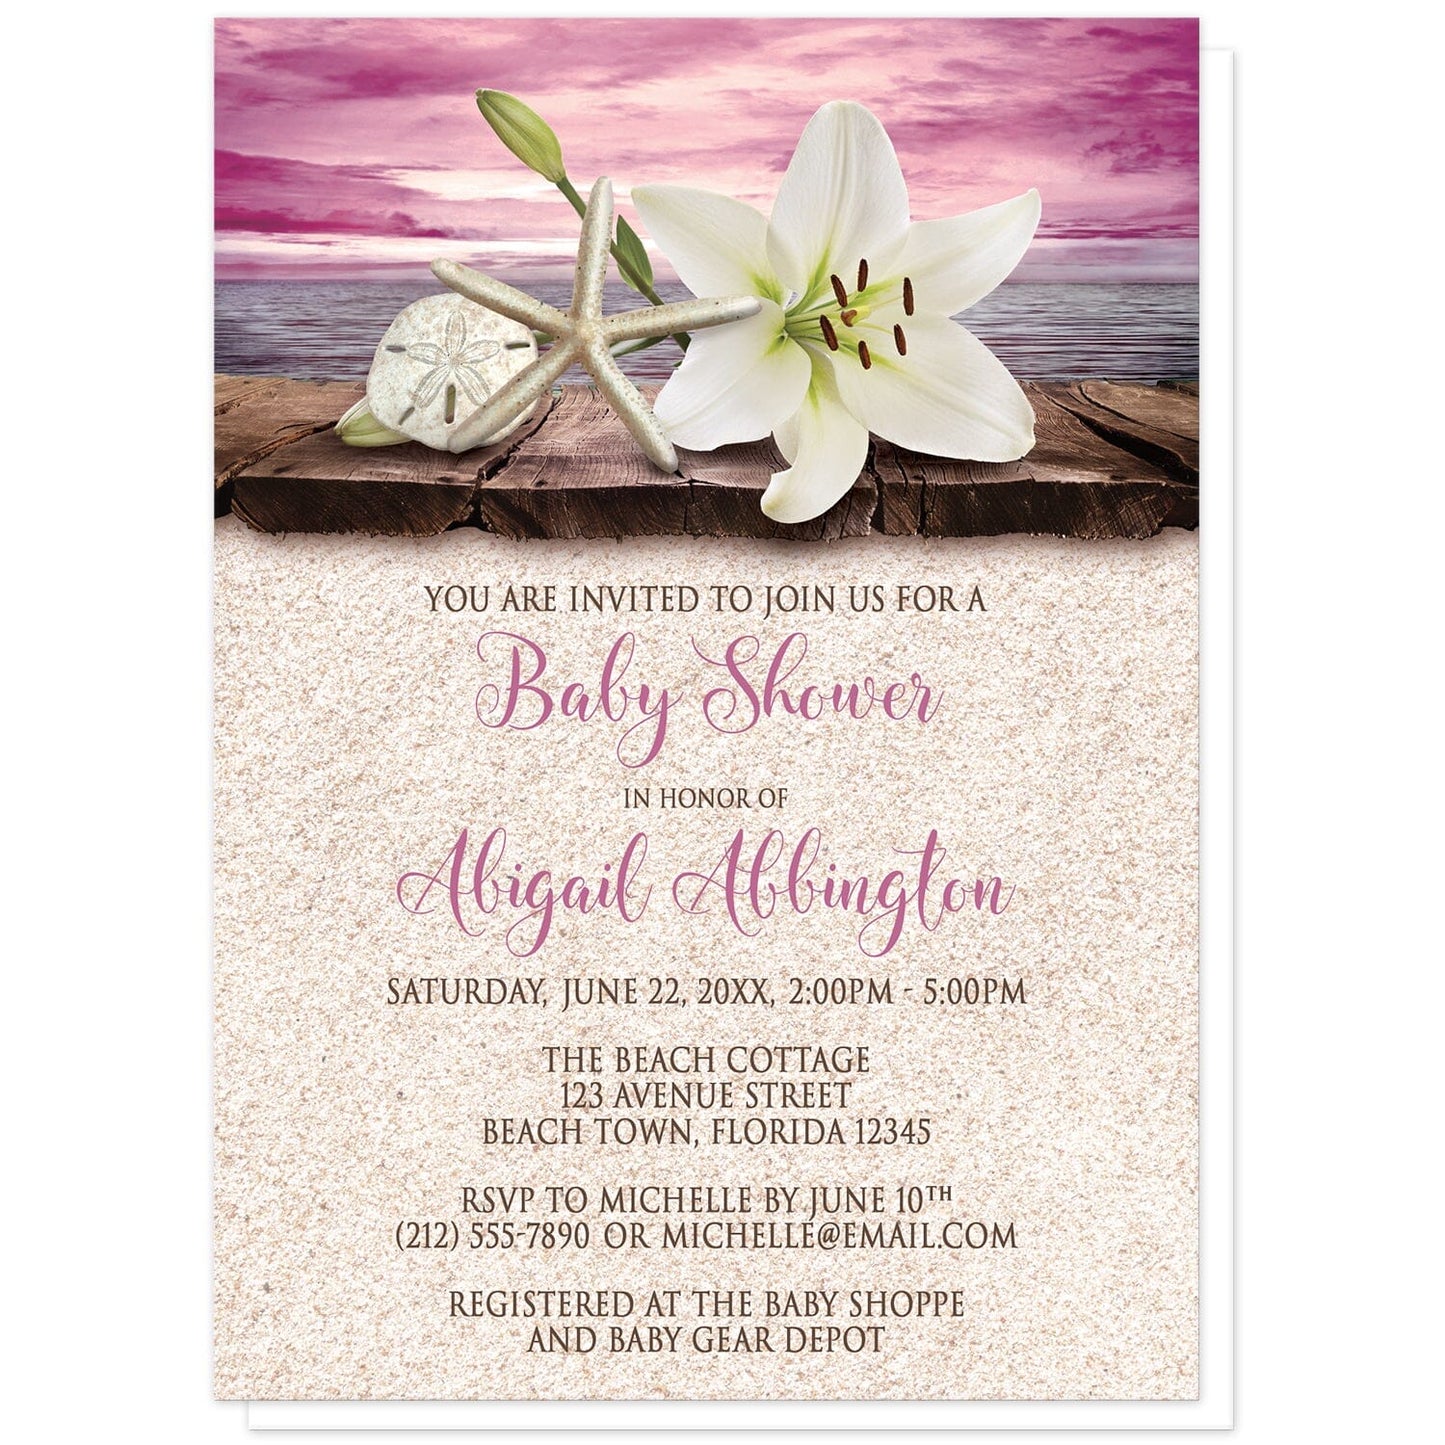 Lily Seashells and Sand Magenta Beach Baby Shower Invitations at Artistically Invited. Tropical lily seashells and sand magenta beach baby shower invitations with an elegant white lily, a starfish, and a sand dollar on a rustic wood dock overlooking the open water under a magenta sunset sky. Your personalized baby shower celebration details are custom printed in dark brown and magenta over a beige sand background design. 